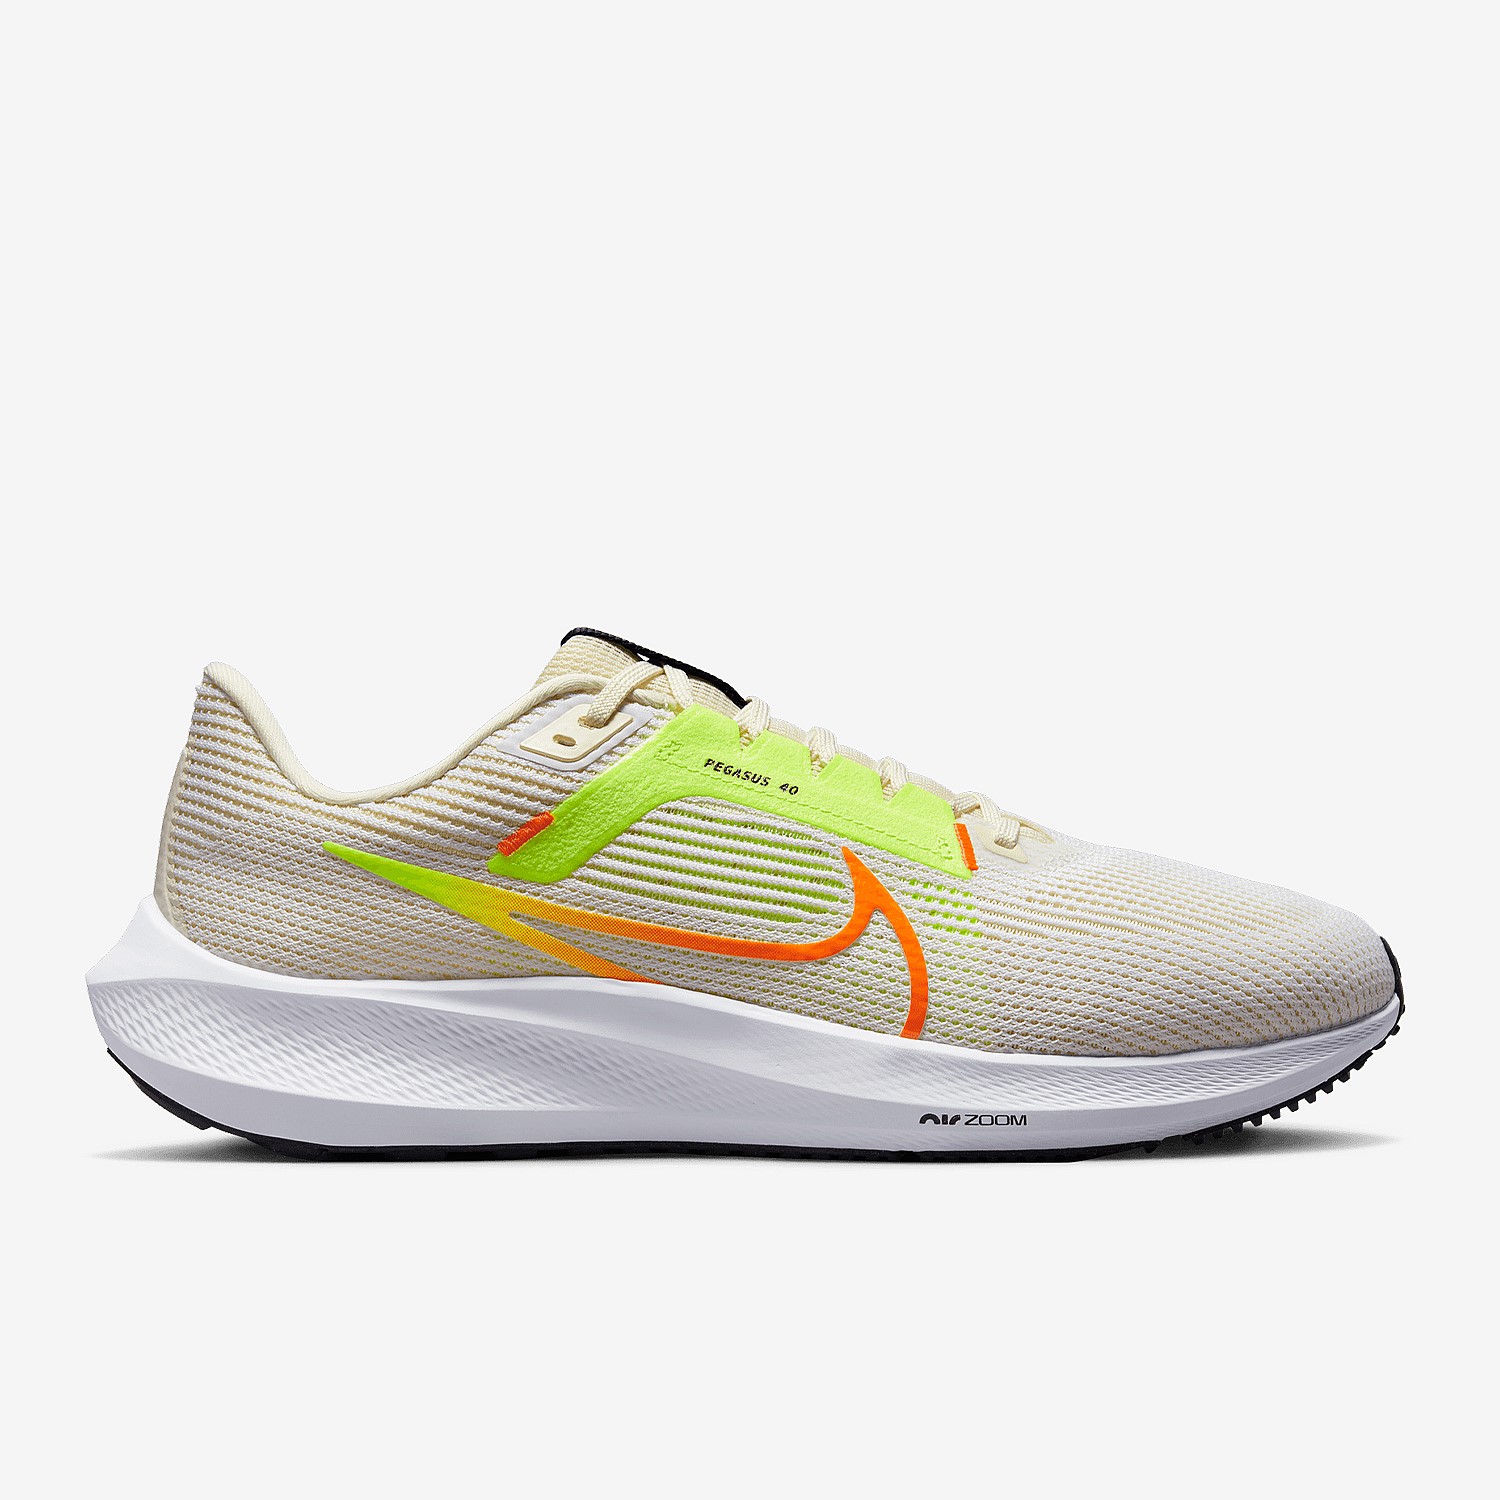 Nike Air Zoom 40 | Performance | Stirling Sports